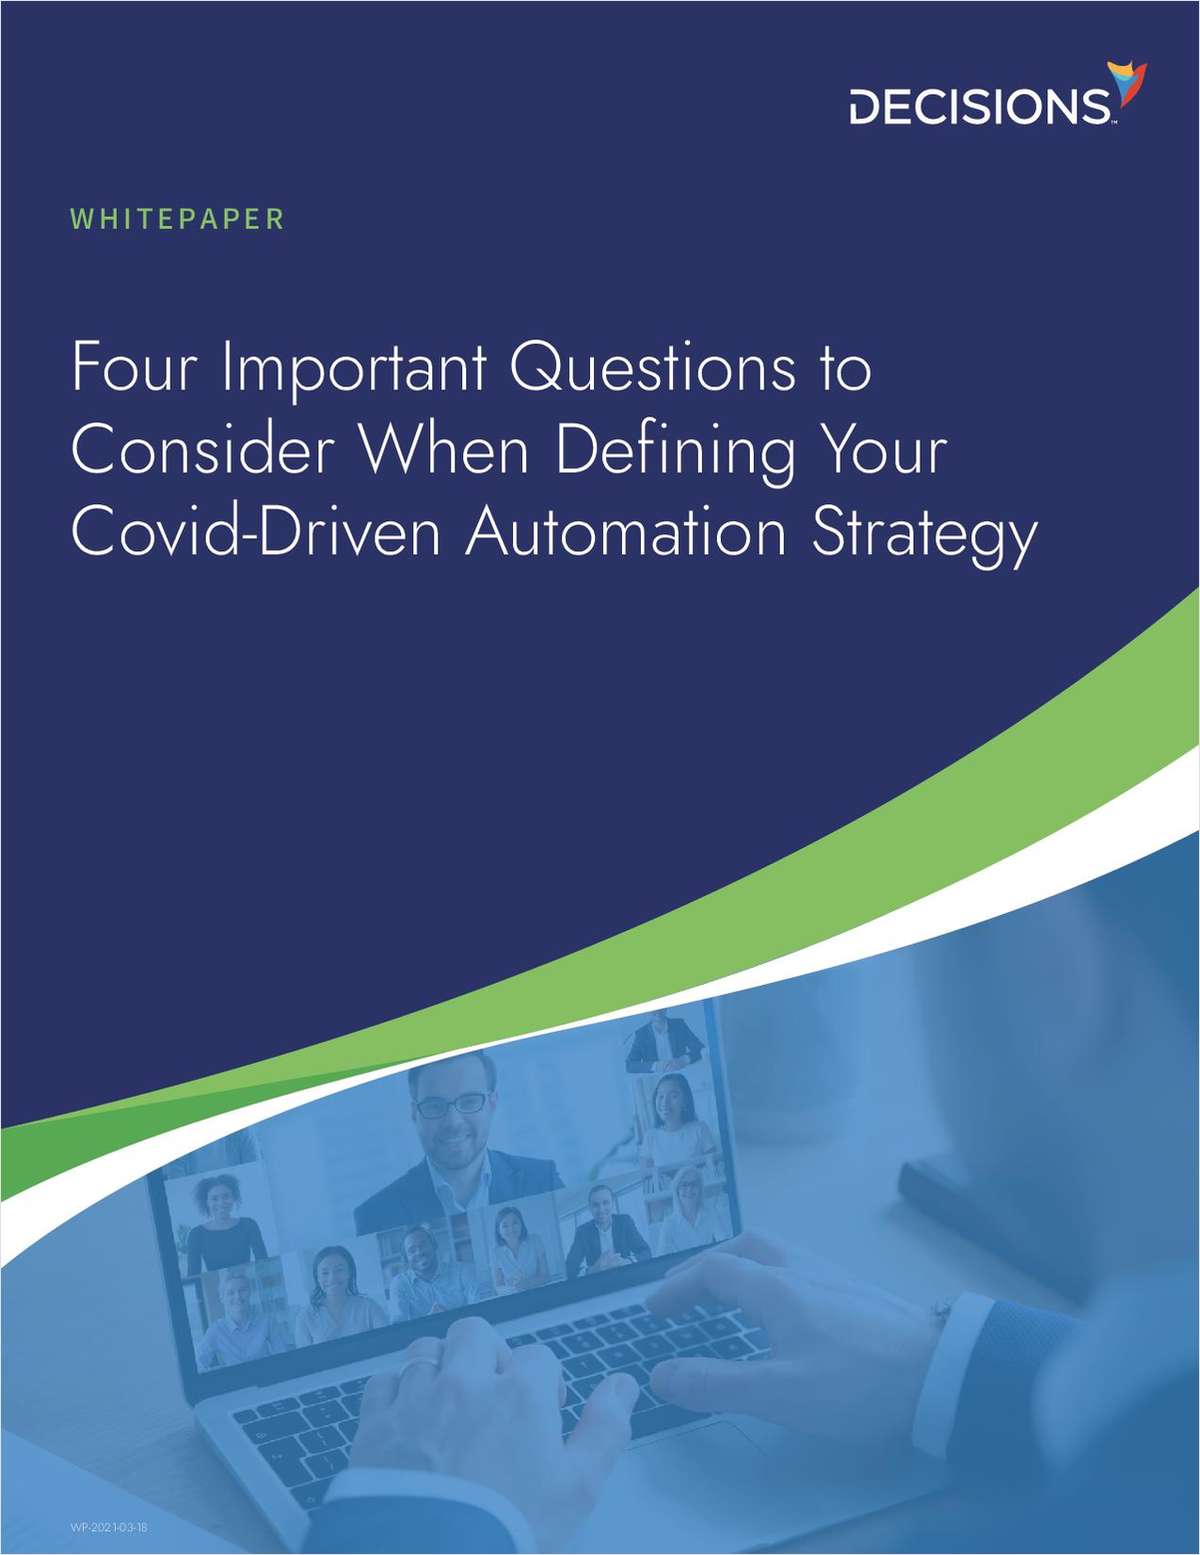 Four Important Questions to Consider When Defining Your Covid-Driven Automation Strategy